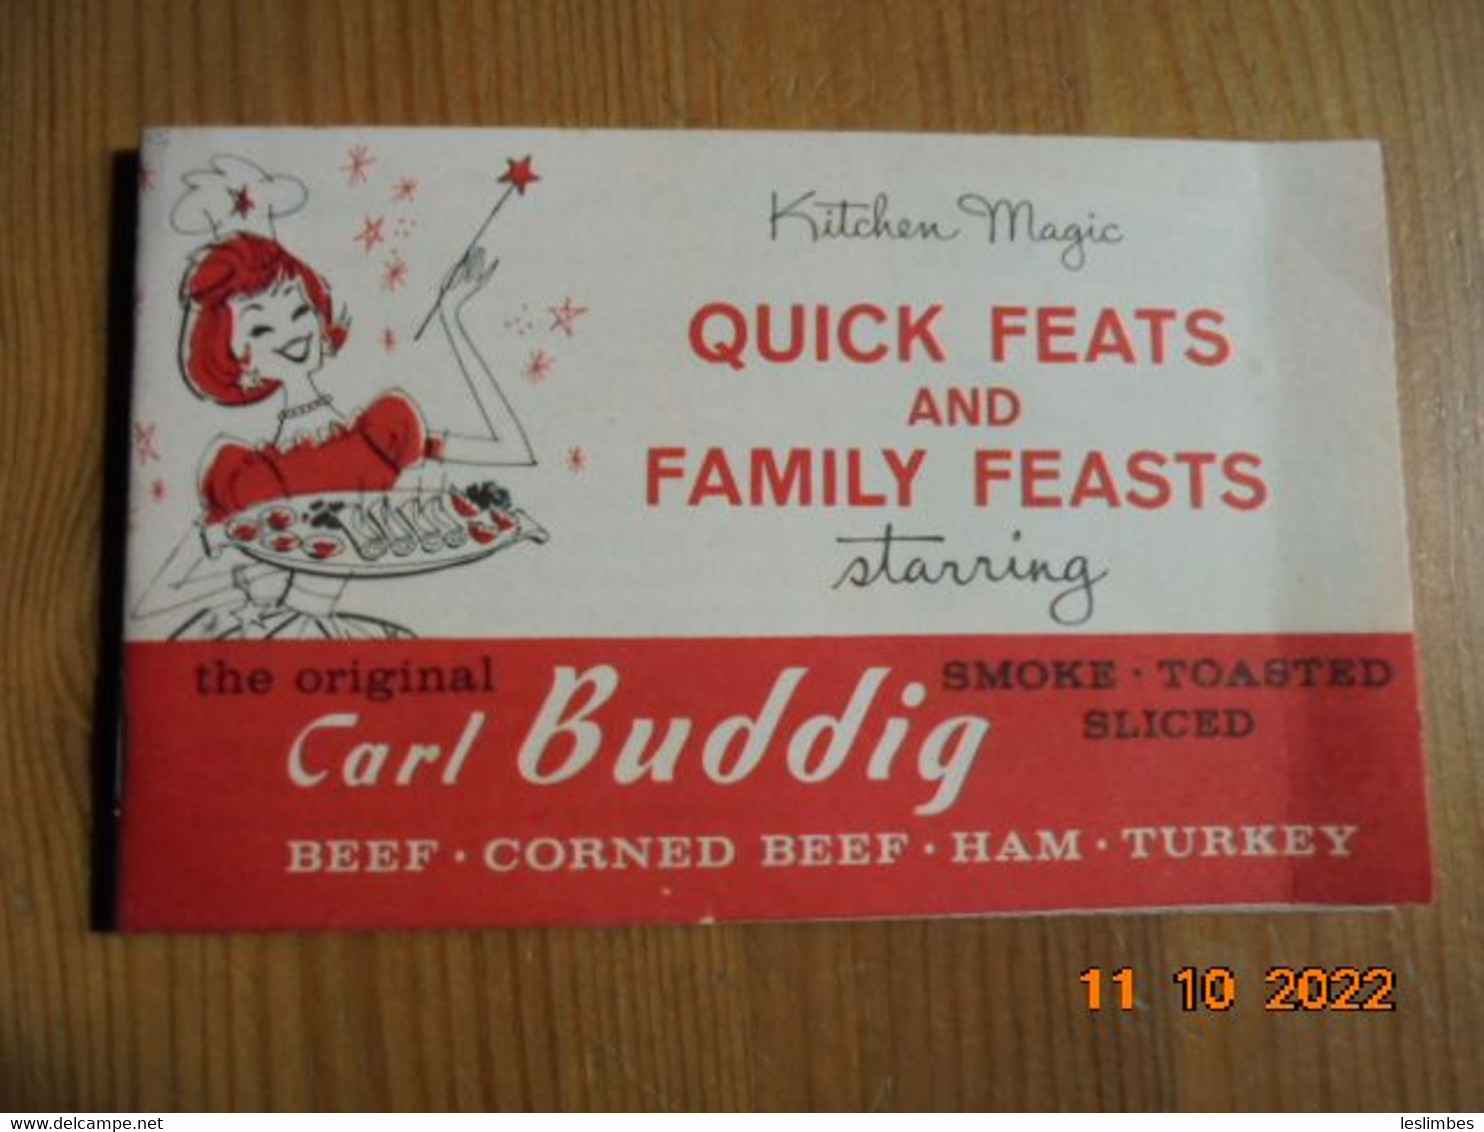 Kitchen Magic Quick Feats And Family Feasts Starring The Original Carl Buddig Smoke Toasted Sliced Beef, Corned Beef.... - American (US)